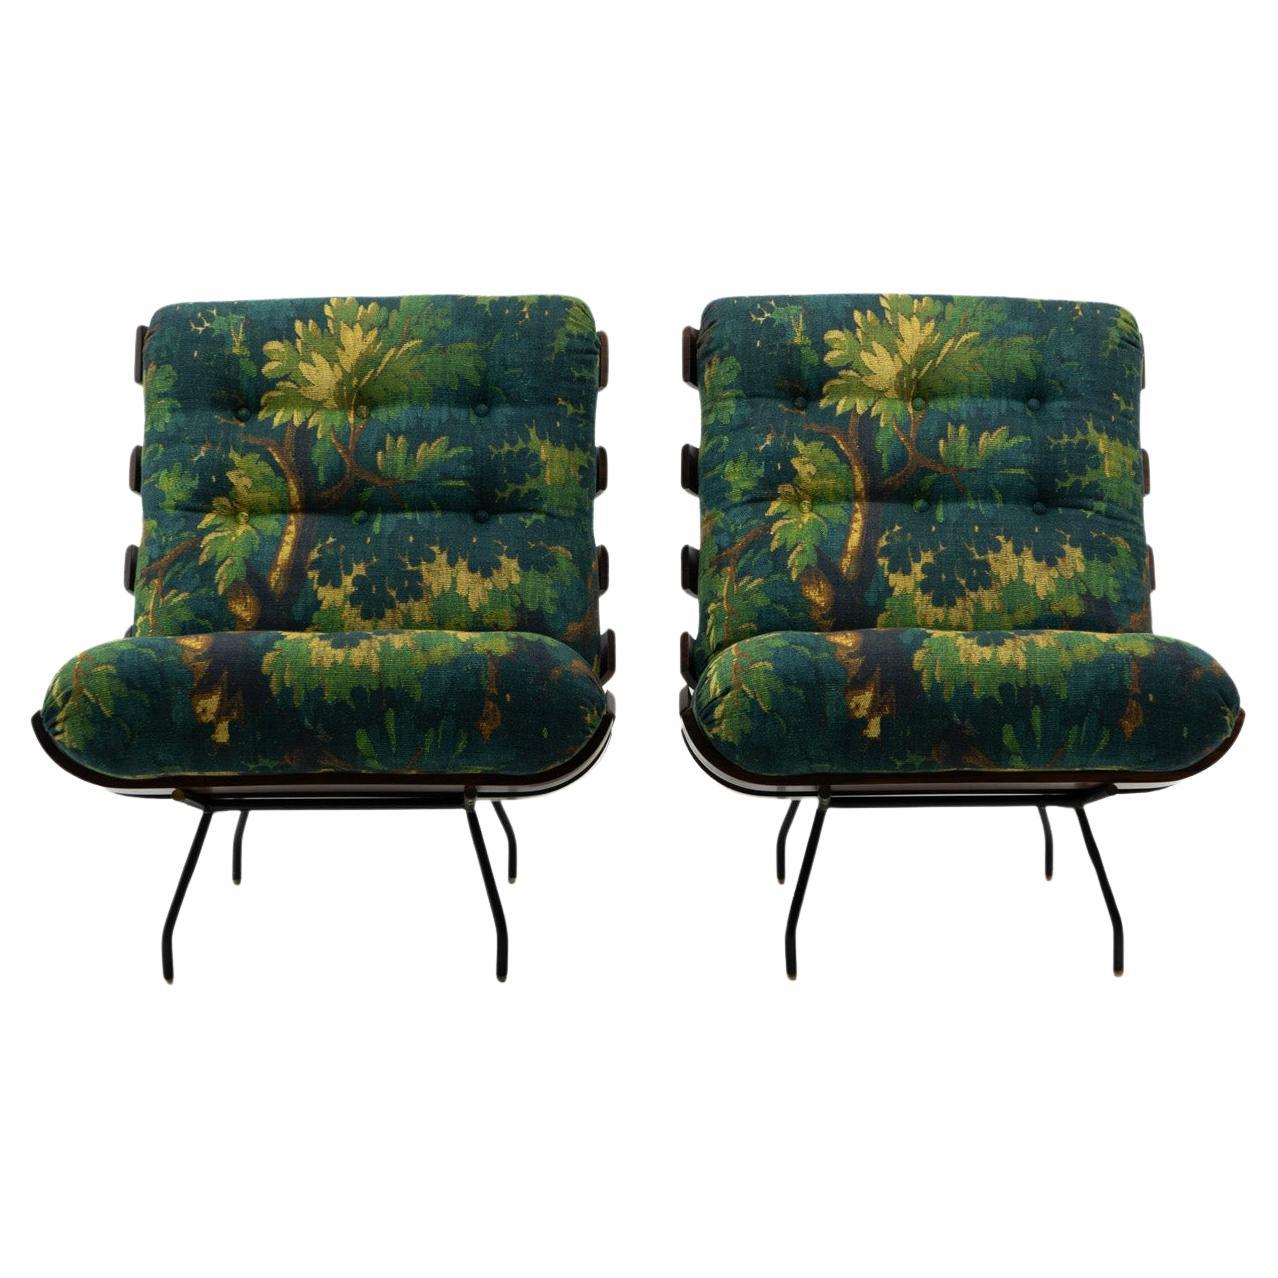 Brazilian Design Costela Lounge Chairs by Hauner & Eisler for Forma, 1950s For Sale